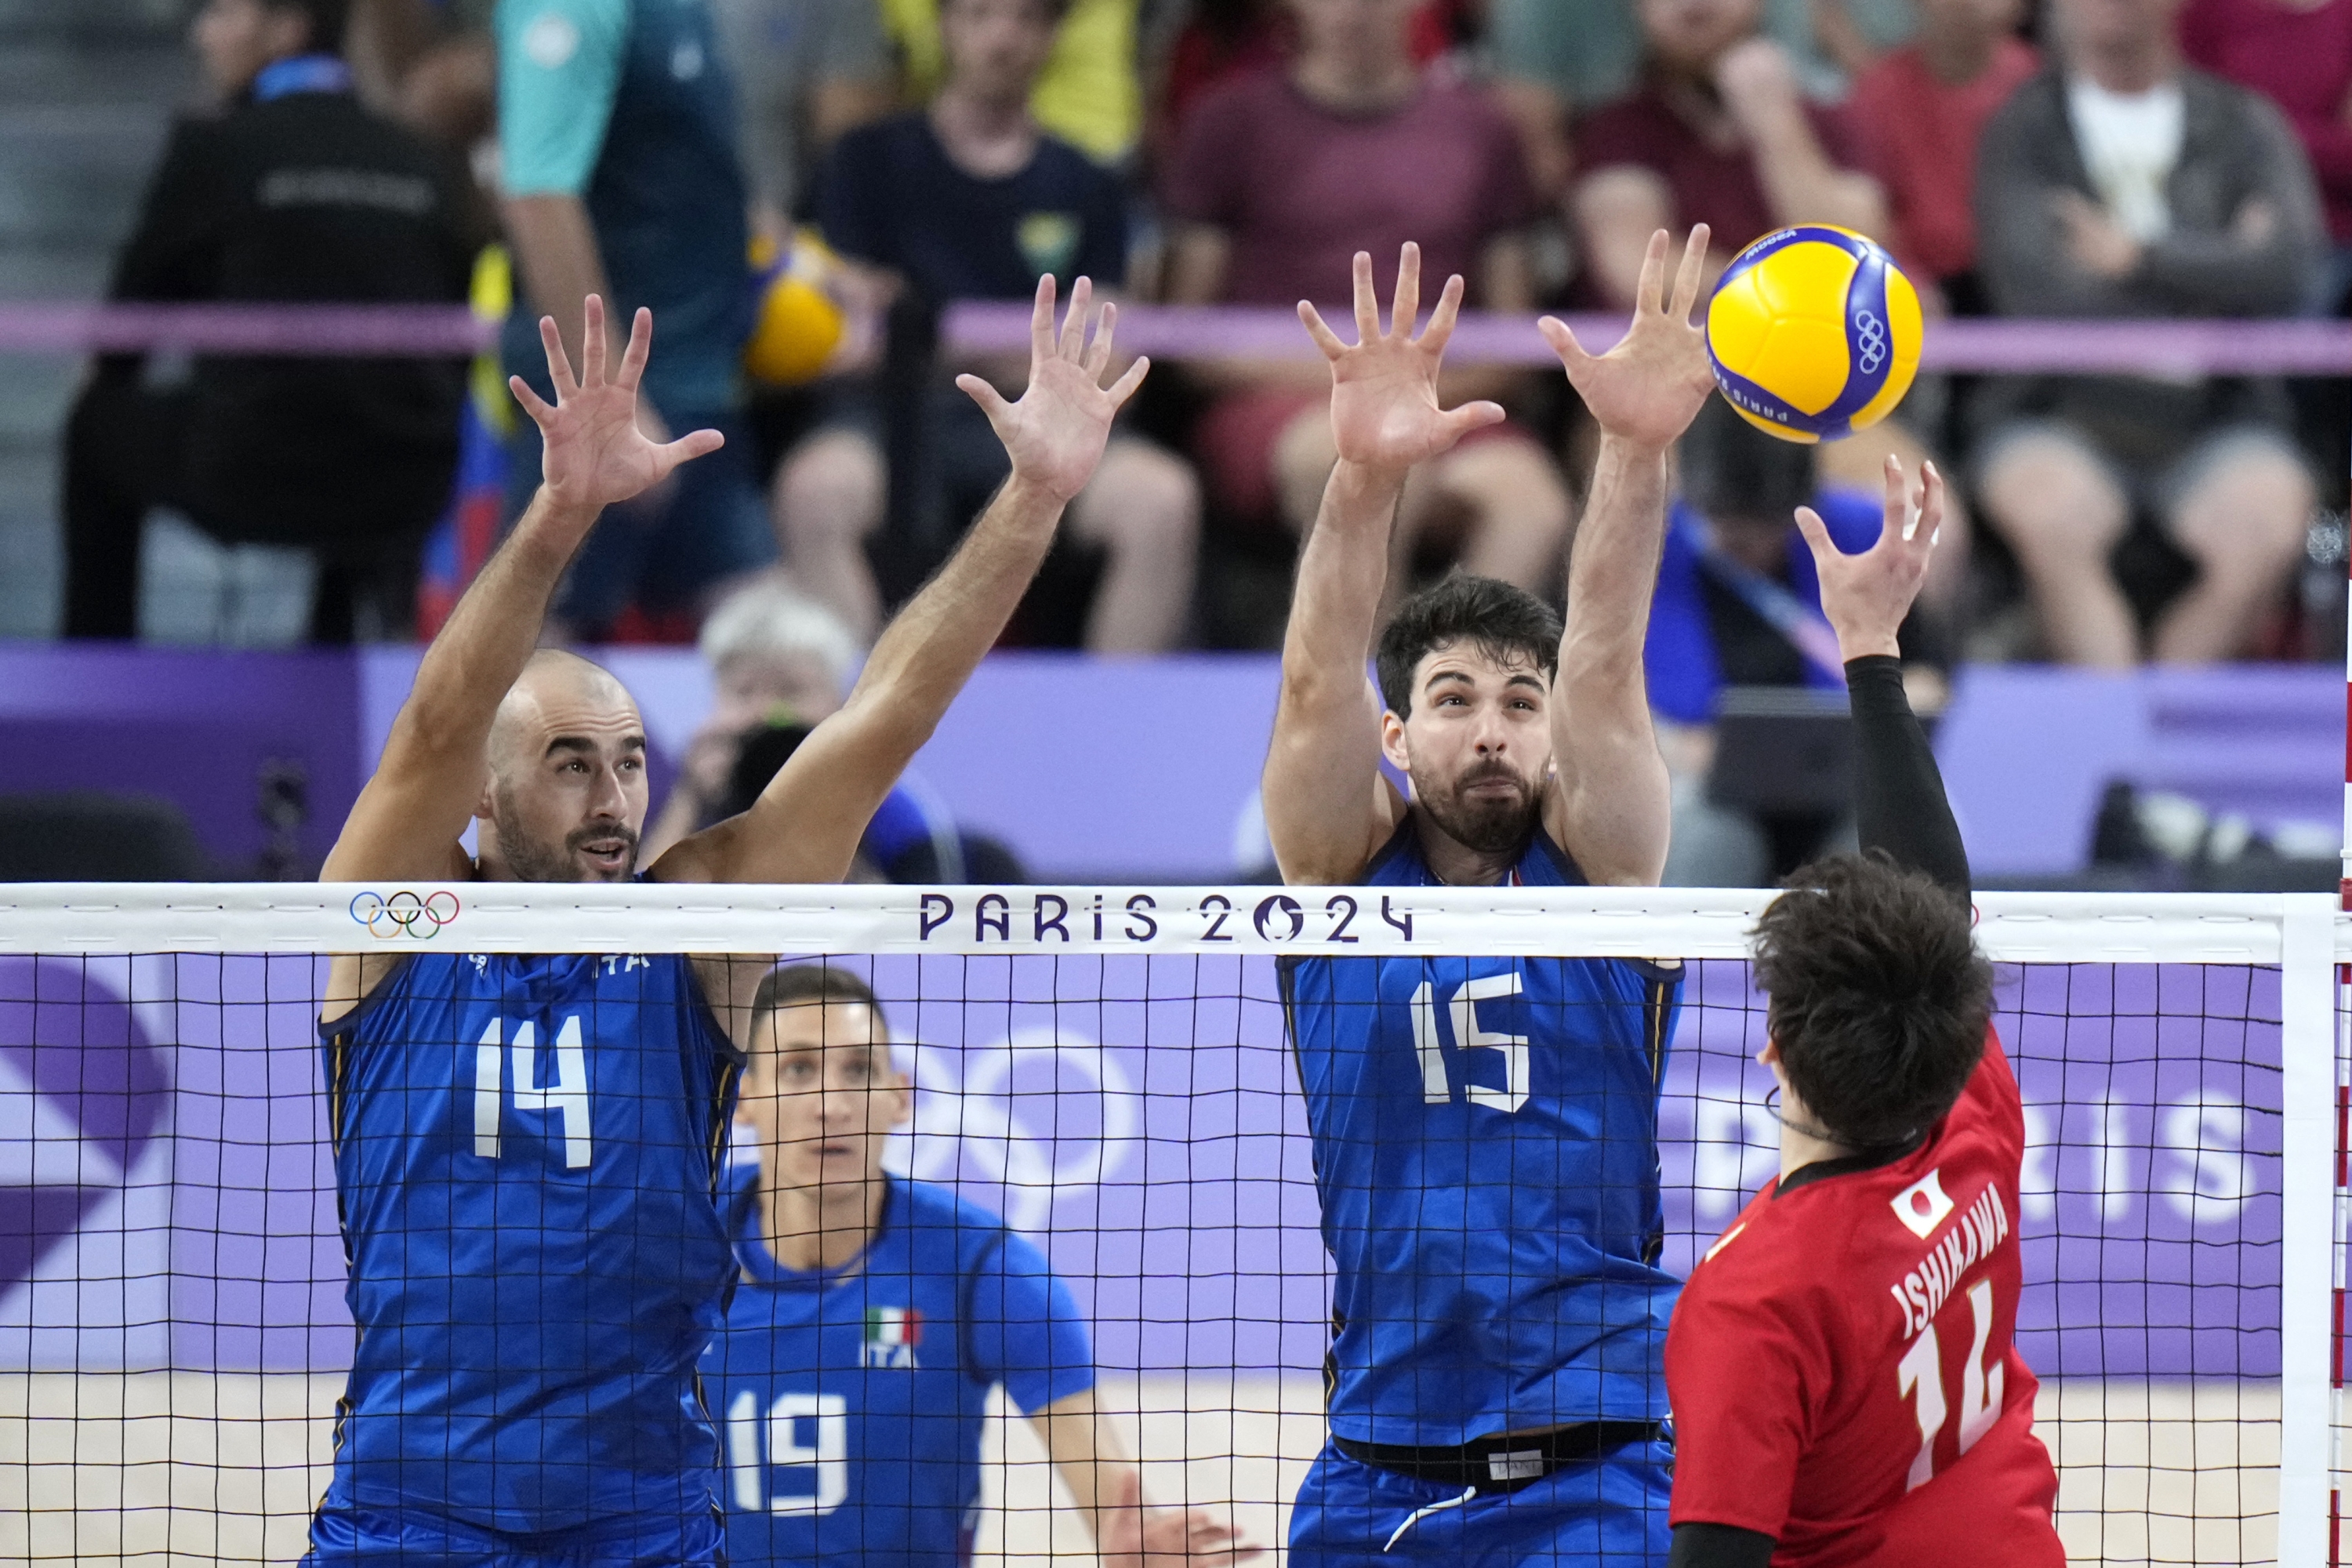 Gianluca Galassi, left, and Daniele Lavia, of Italy, block a ball by Yuki Ishikawa, of Japan, during a men's quarter final volleyball match between Italy and Japan at the 2024 Summer Olympics, Monday, Aug. 5, 2024, in Paris, France. (AP Photo/Alessandra Tarantino)